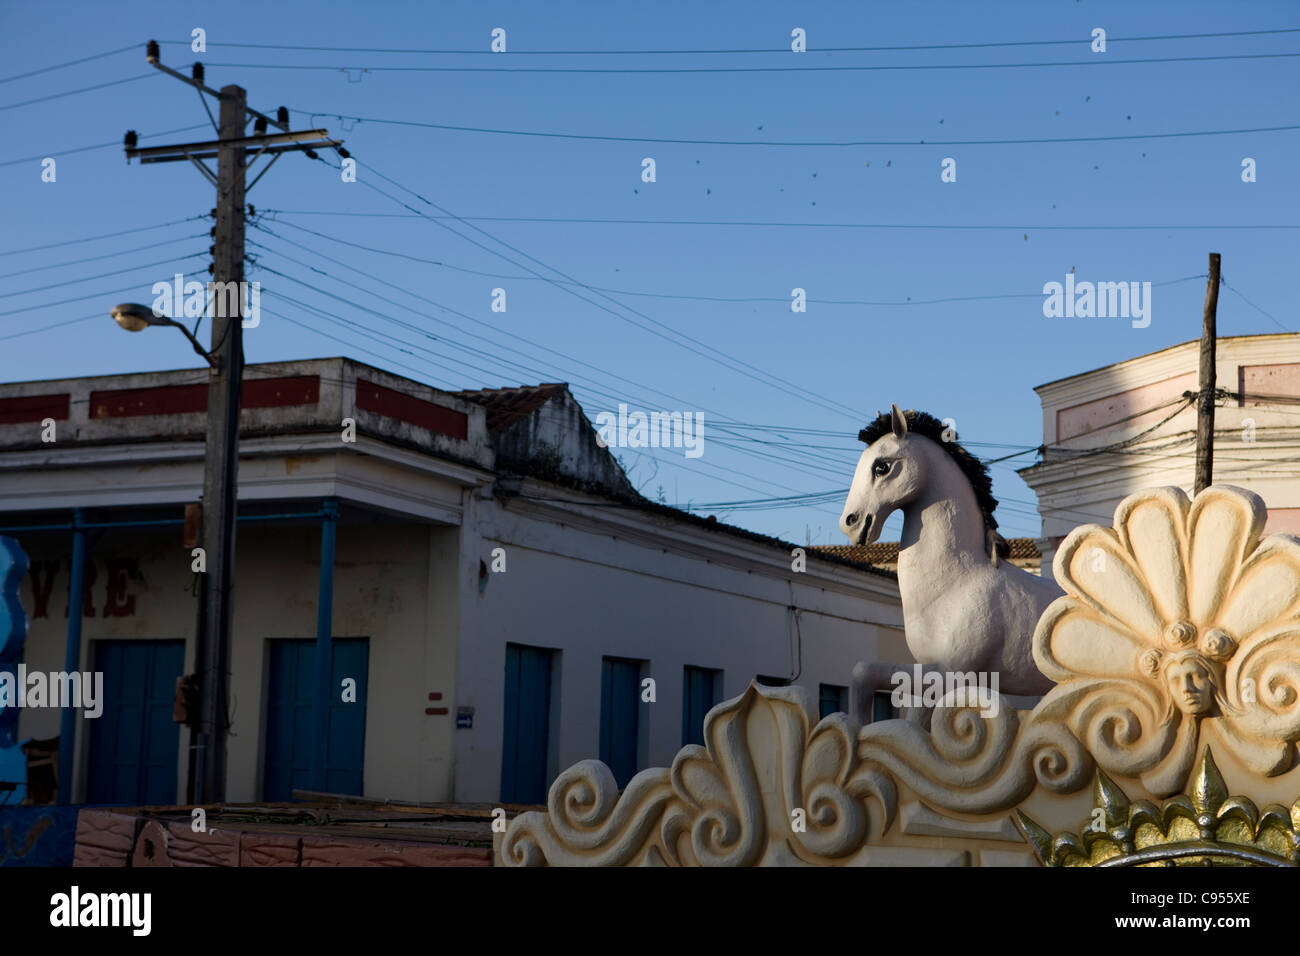 Las Parrandas de Remedios, Remedios, Cuba, Christmas Eve. Christmas morning after the night of celebrations. The floats await dismantling by locals. Stock Photo